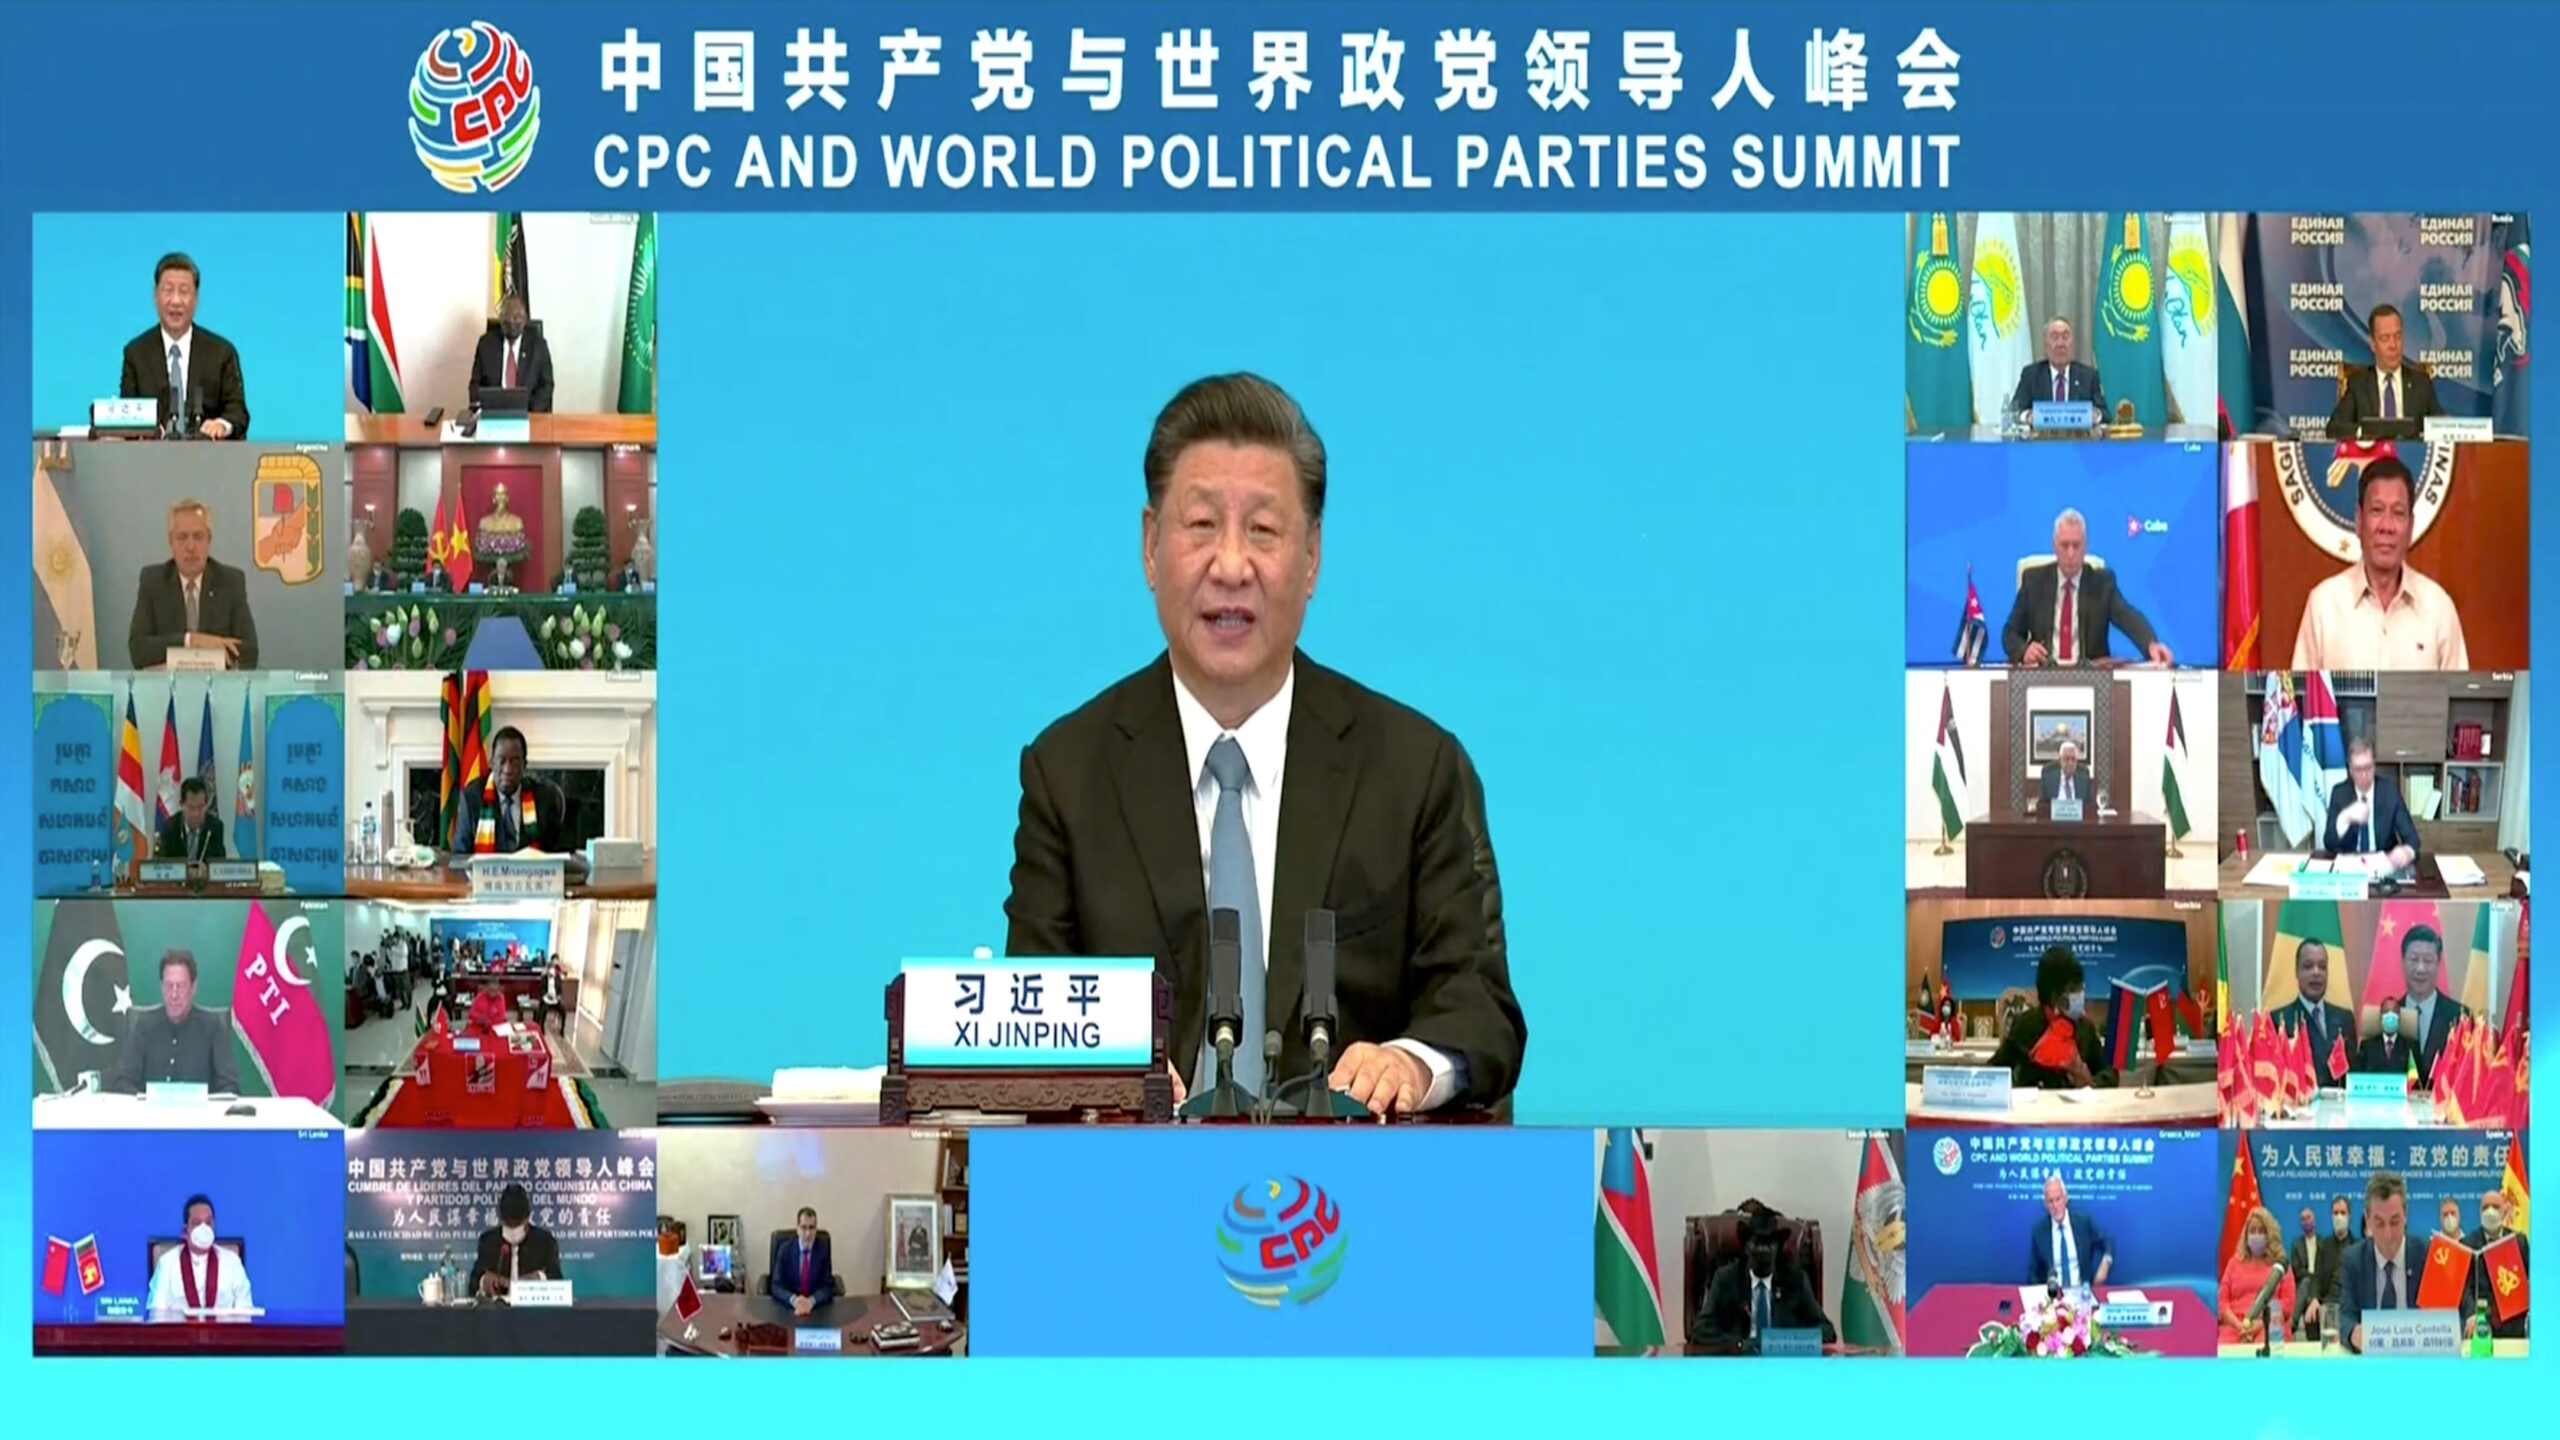 Chinese President Xi Jinping speaks via video link at the CPC and World Political Parties Summit, held to commemorate the 100th founding anniversary of Communist Party of China (CPC), in Beijing, China in this still image taken from a video July 6, 2021. CCTV via Reuters TV